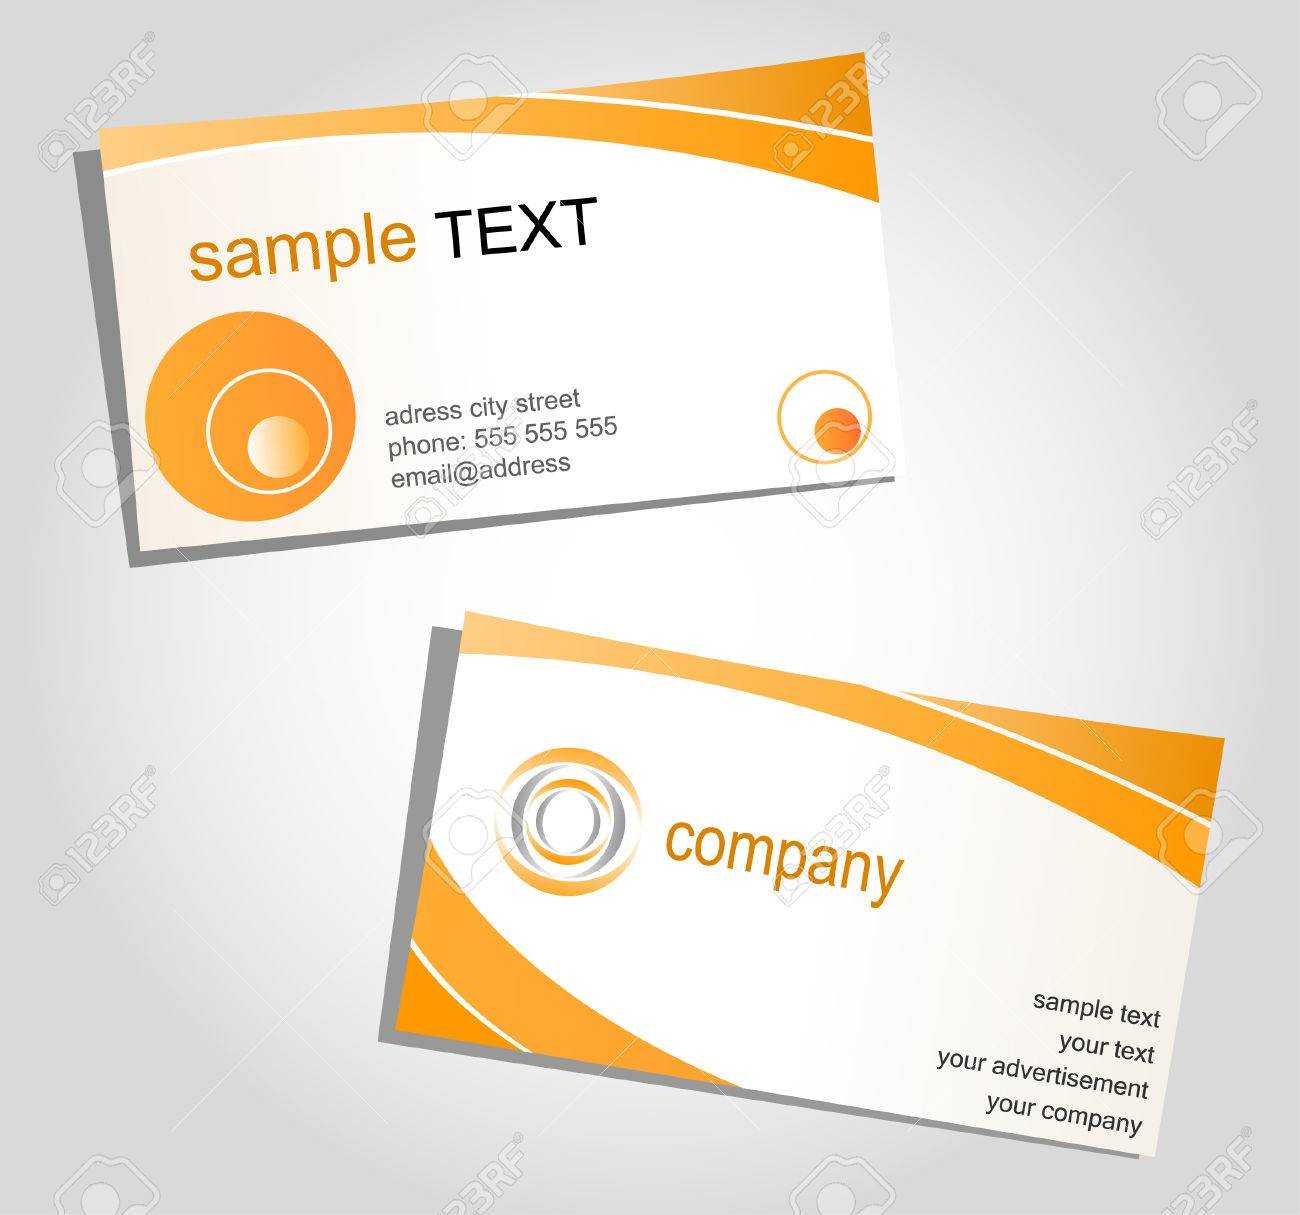 Templates For Visiting Cards ] – 100 Free Business Cards Psd Intended For Advocare Business Card Template